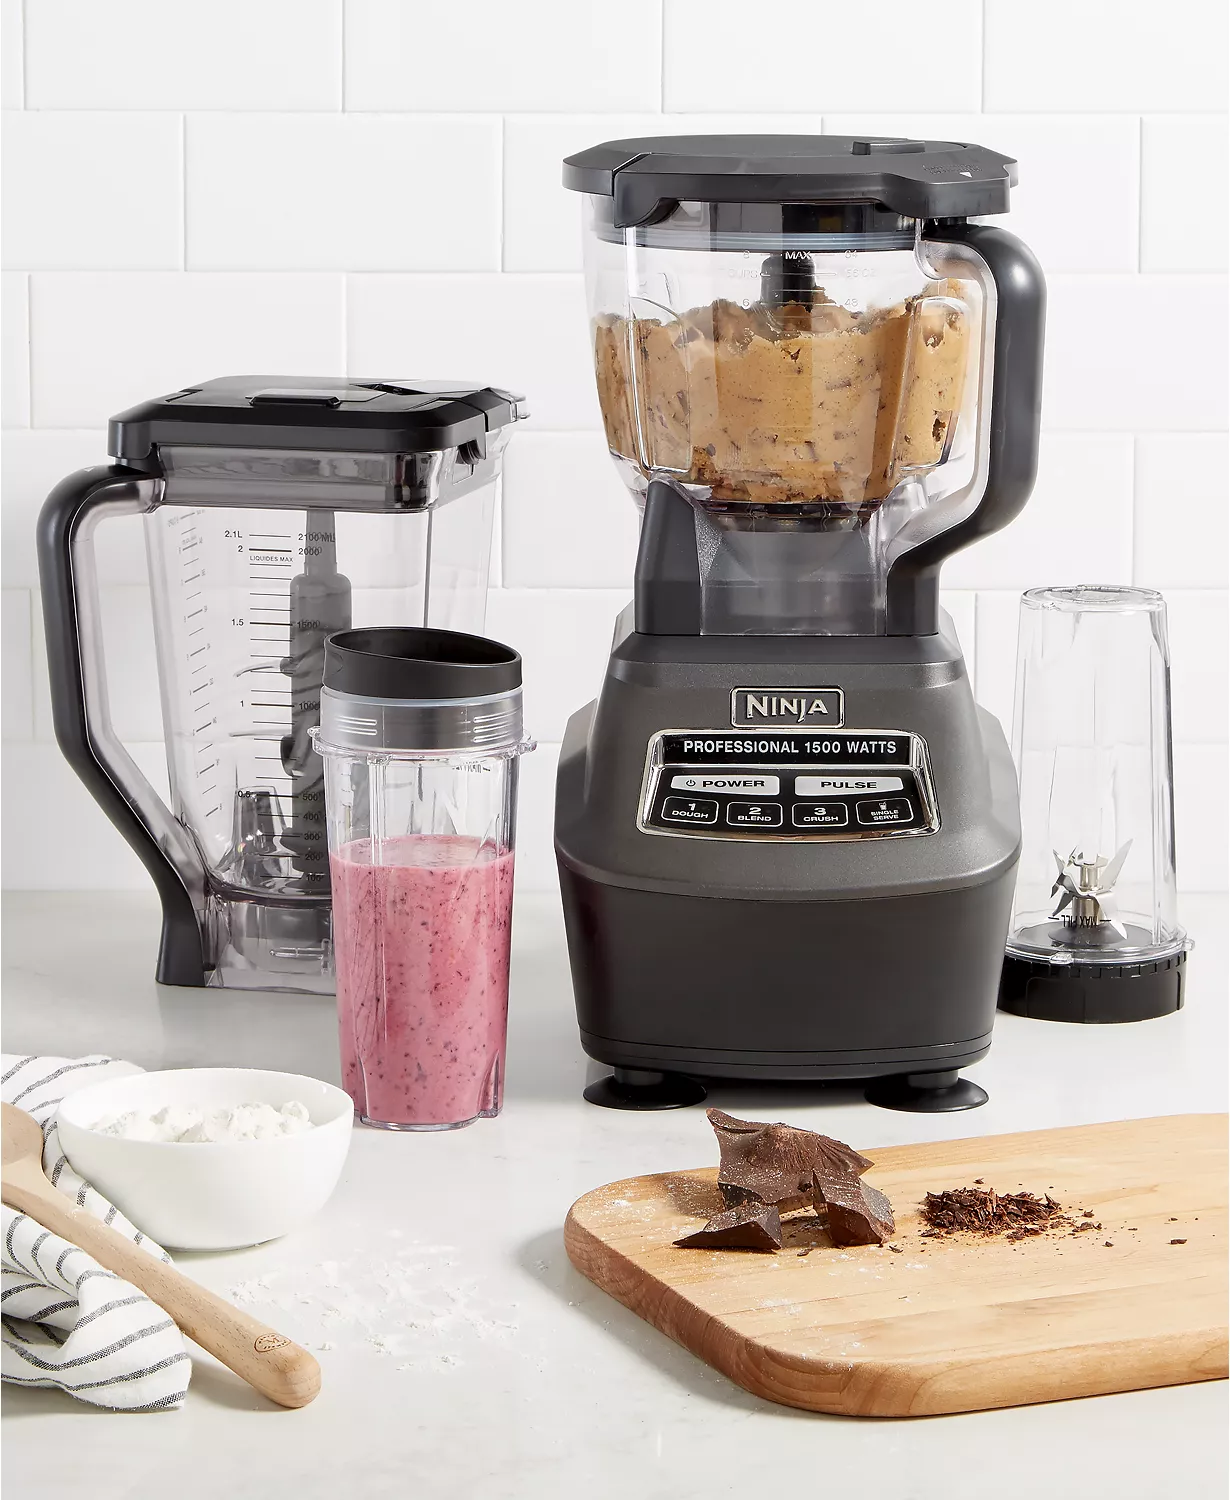 Ninja BL770 Mega Kitchen System, 1500W, 4 Functions for Smoothies,  Processing, Dough, Drinks & More, with 72-oz.* Blender Pitcher, 64-oz.  Processor Bowl, (2) 16-oz. To-Go Cups & (2) Lids, Black